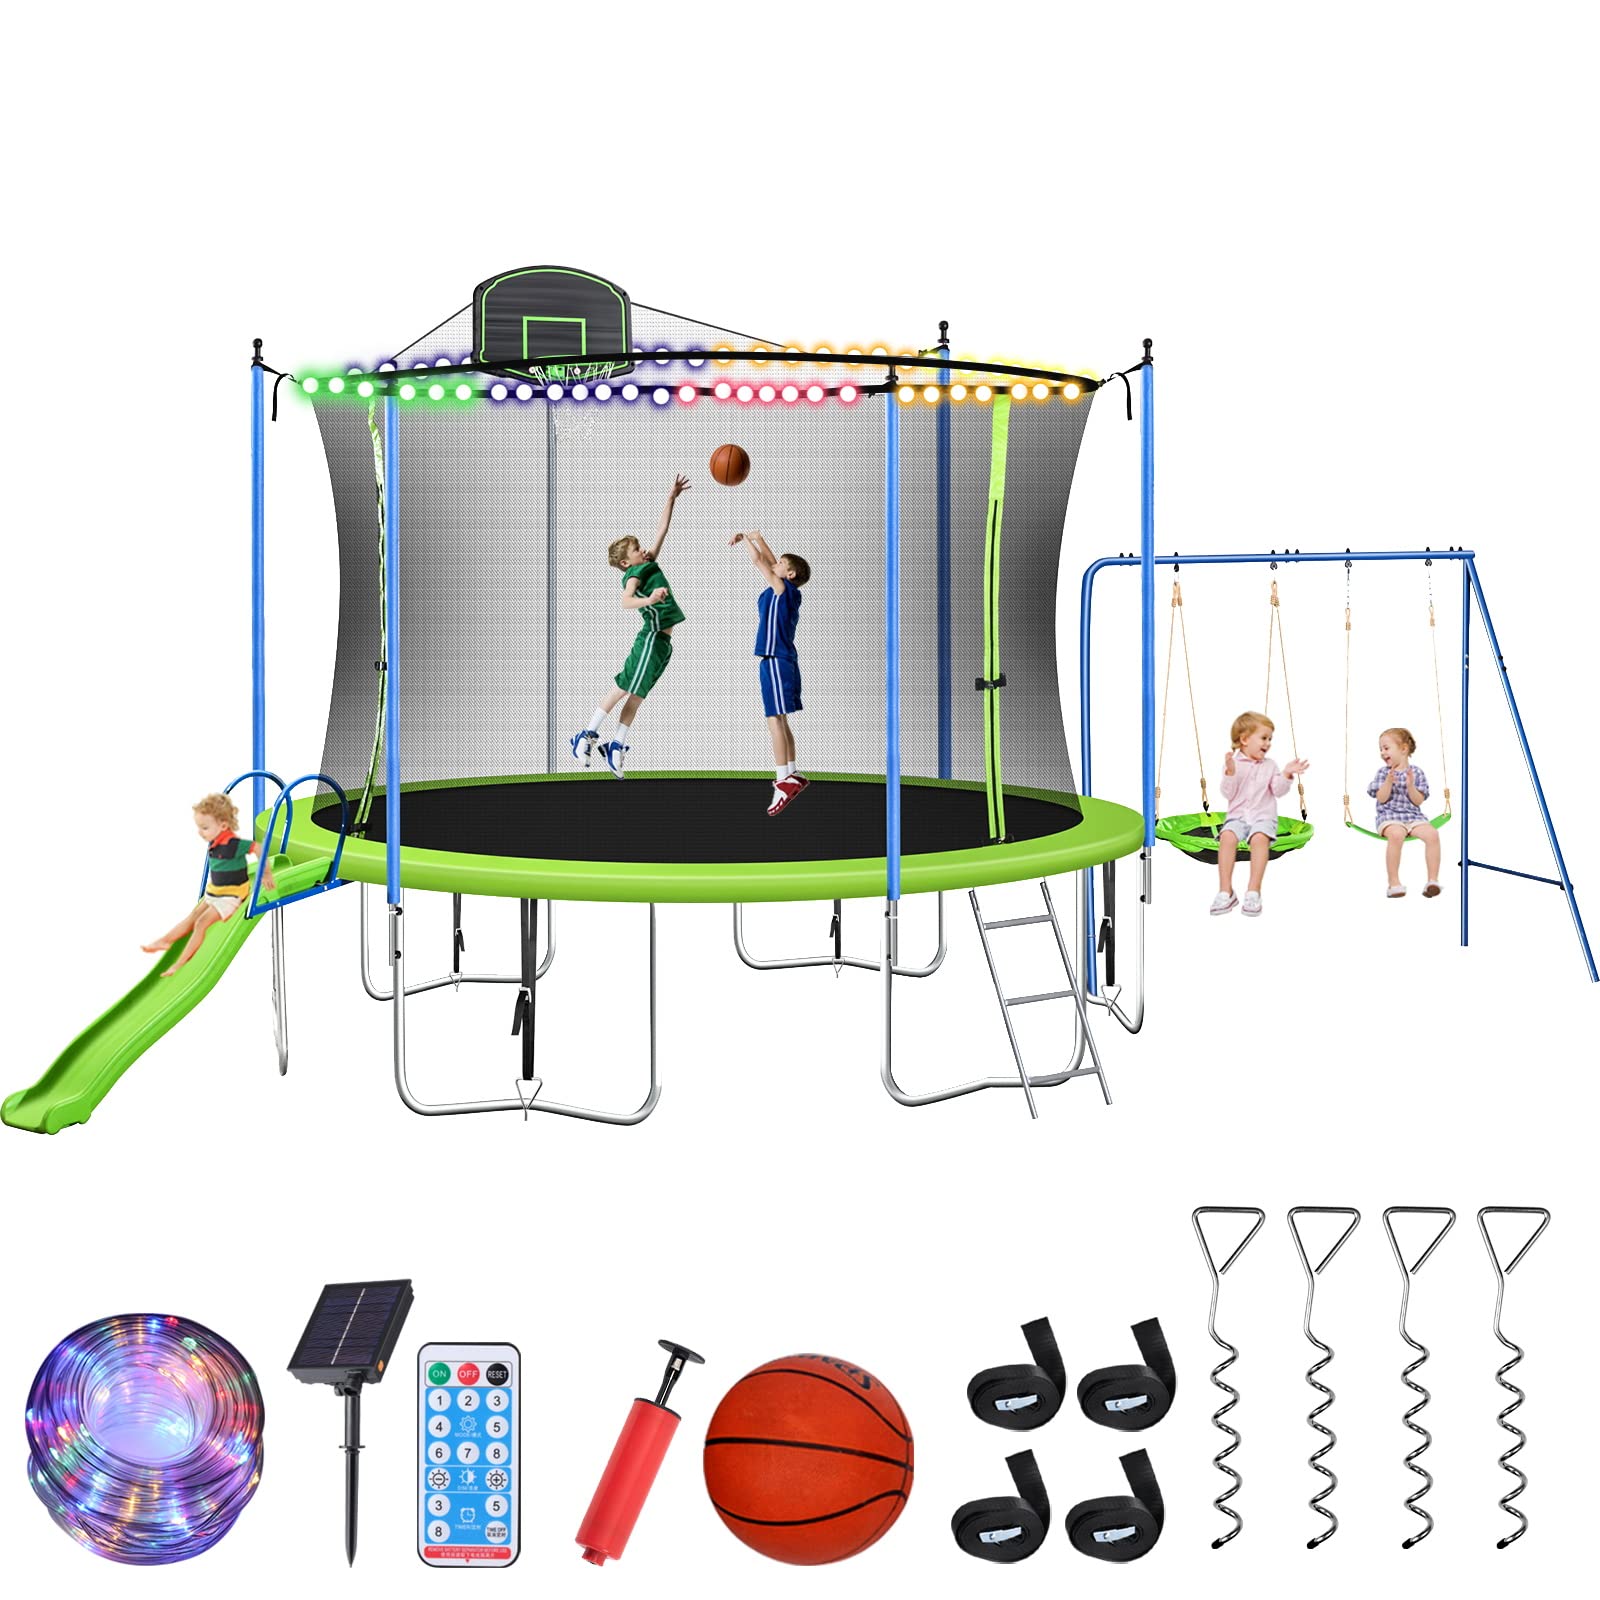 Lyromix 12 14FT Trampoline with Slide and Swings, ASTM Approved Large Recreational Trampoline with Basketball Hoop and Ladder,Ou